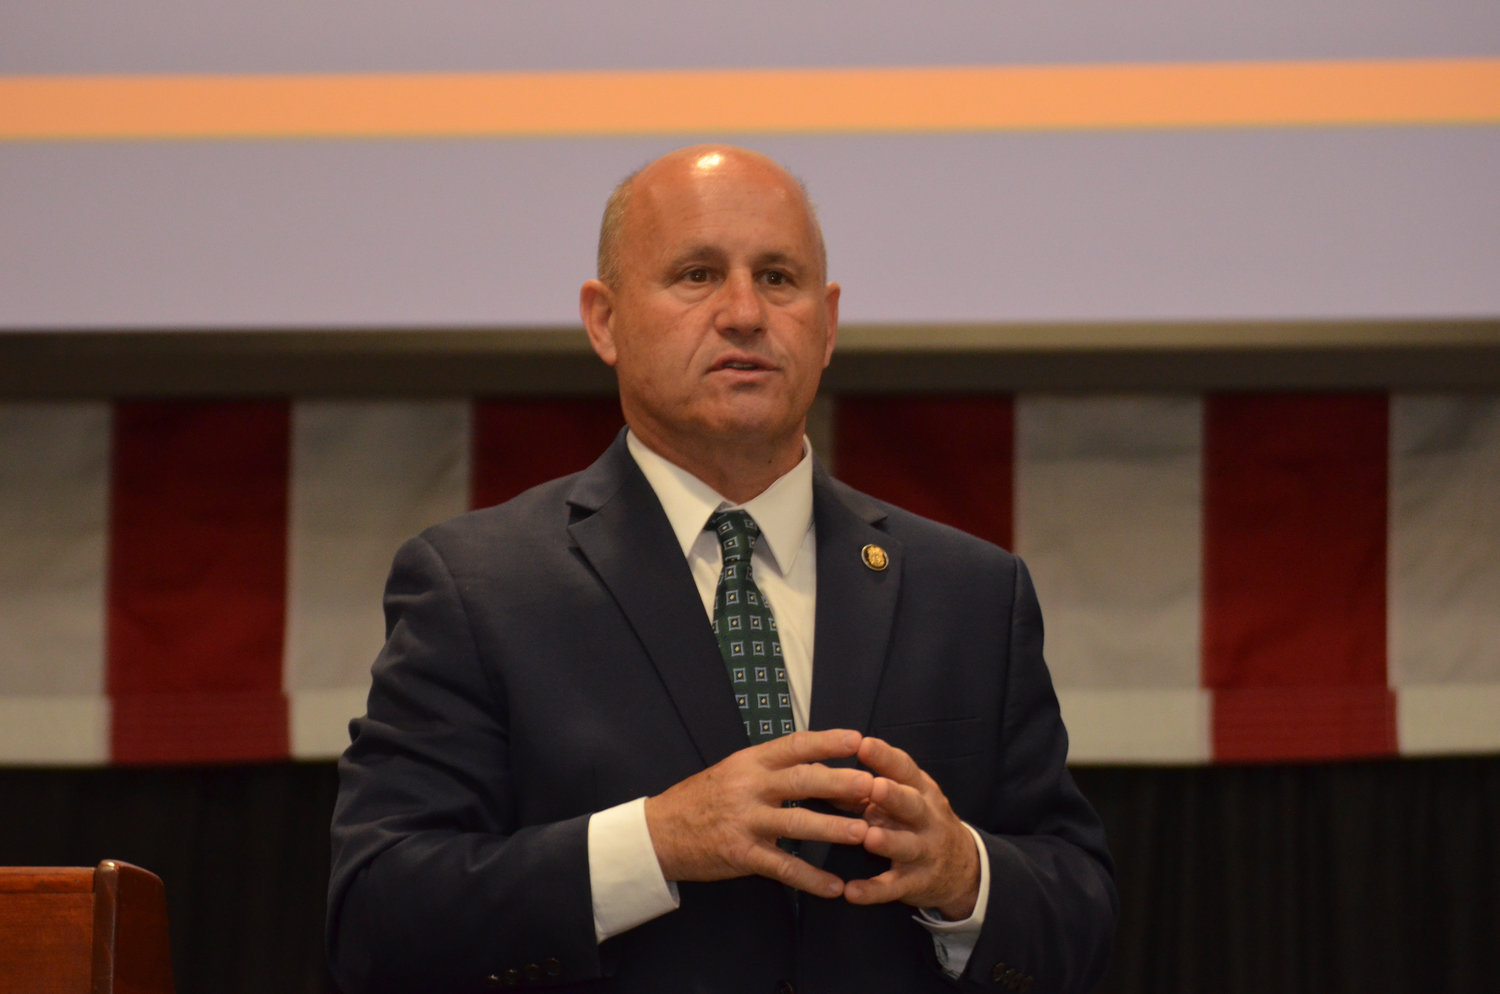 Nassau County Police Department commissioner Patrick Ryder addresses concerned parent’s worries about opiods, school safety, social media use and early prevention.